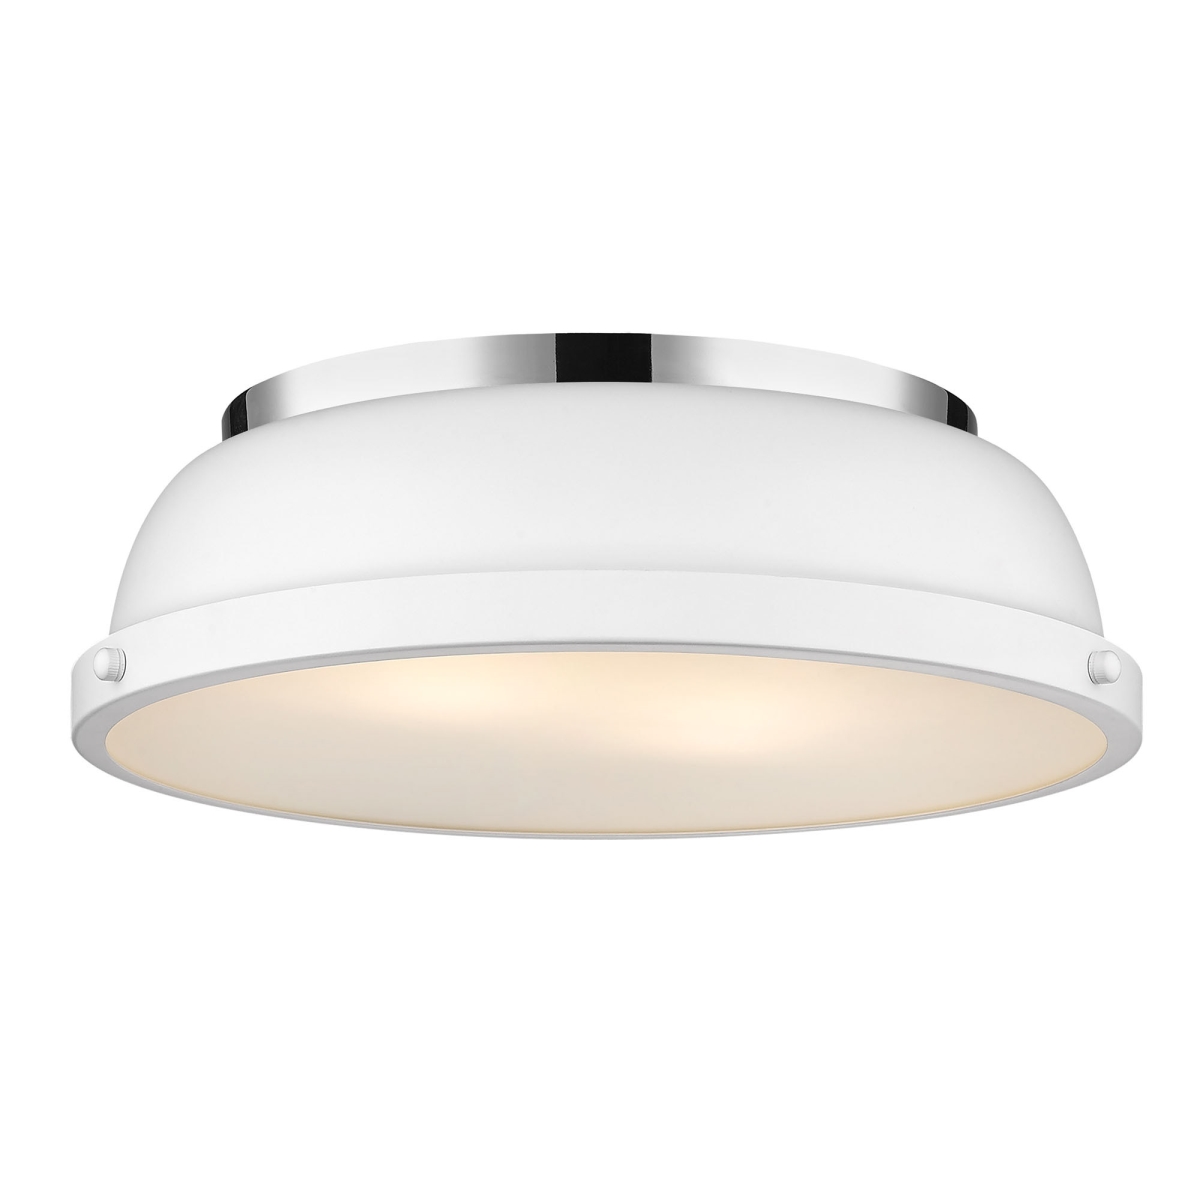 3602-14 Ch-wht 14 In. Duncan Flush Mount In Chrome With A Matte White Shade